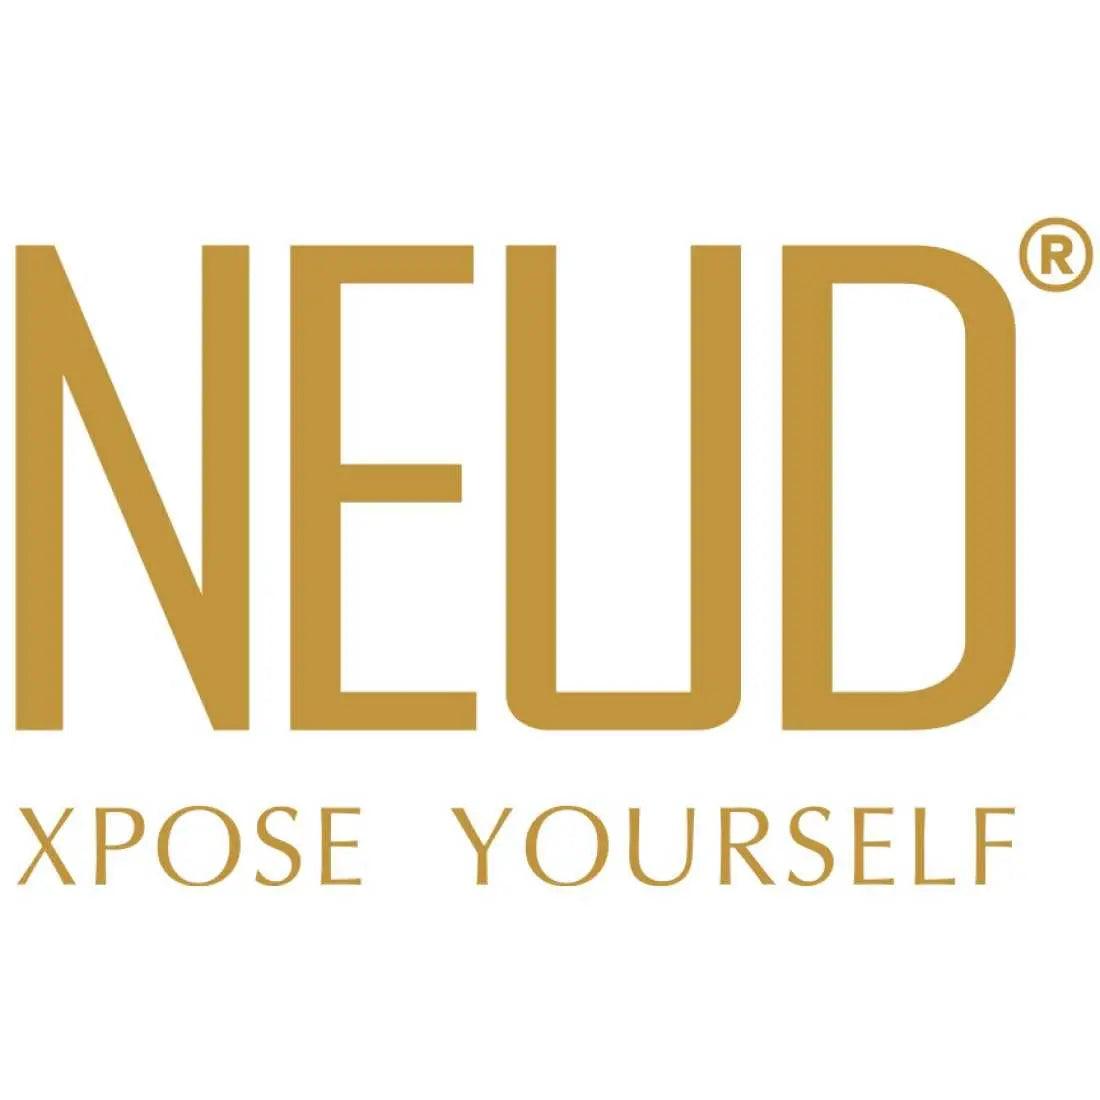 NEUD Combo: Natural Hair Inhibitor and After-Hair-Removal Skin Lotion for Men and Women 8903540011869